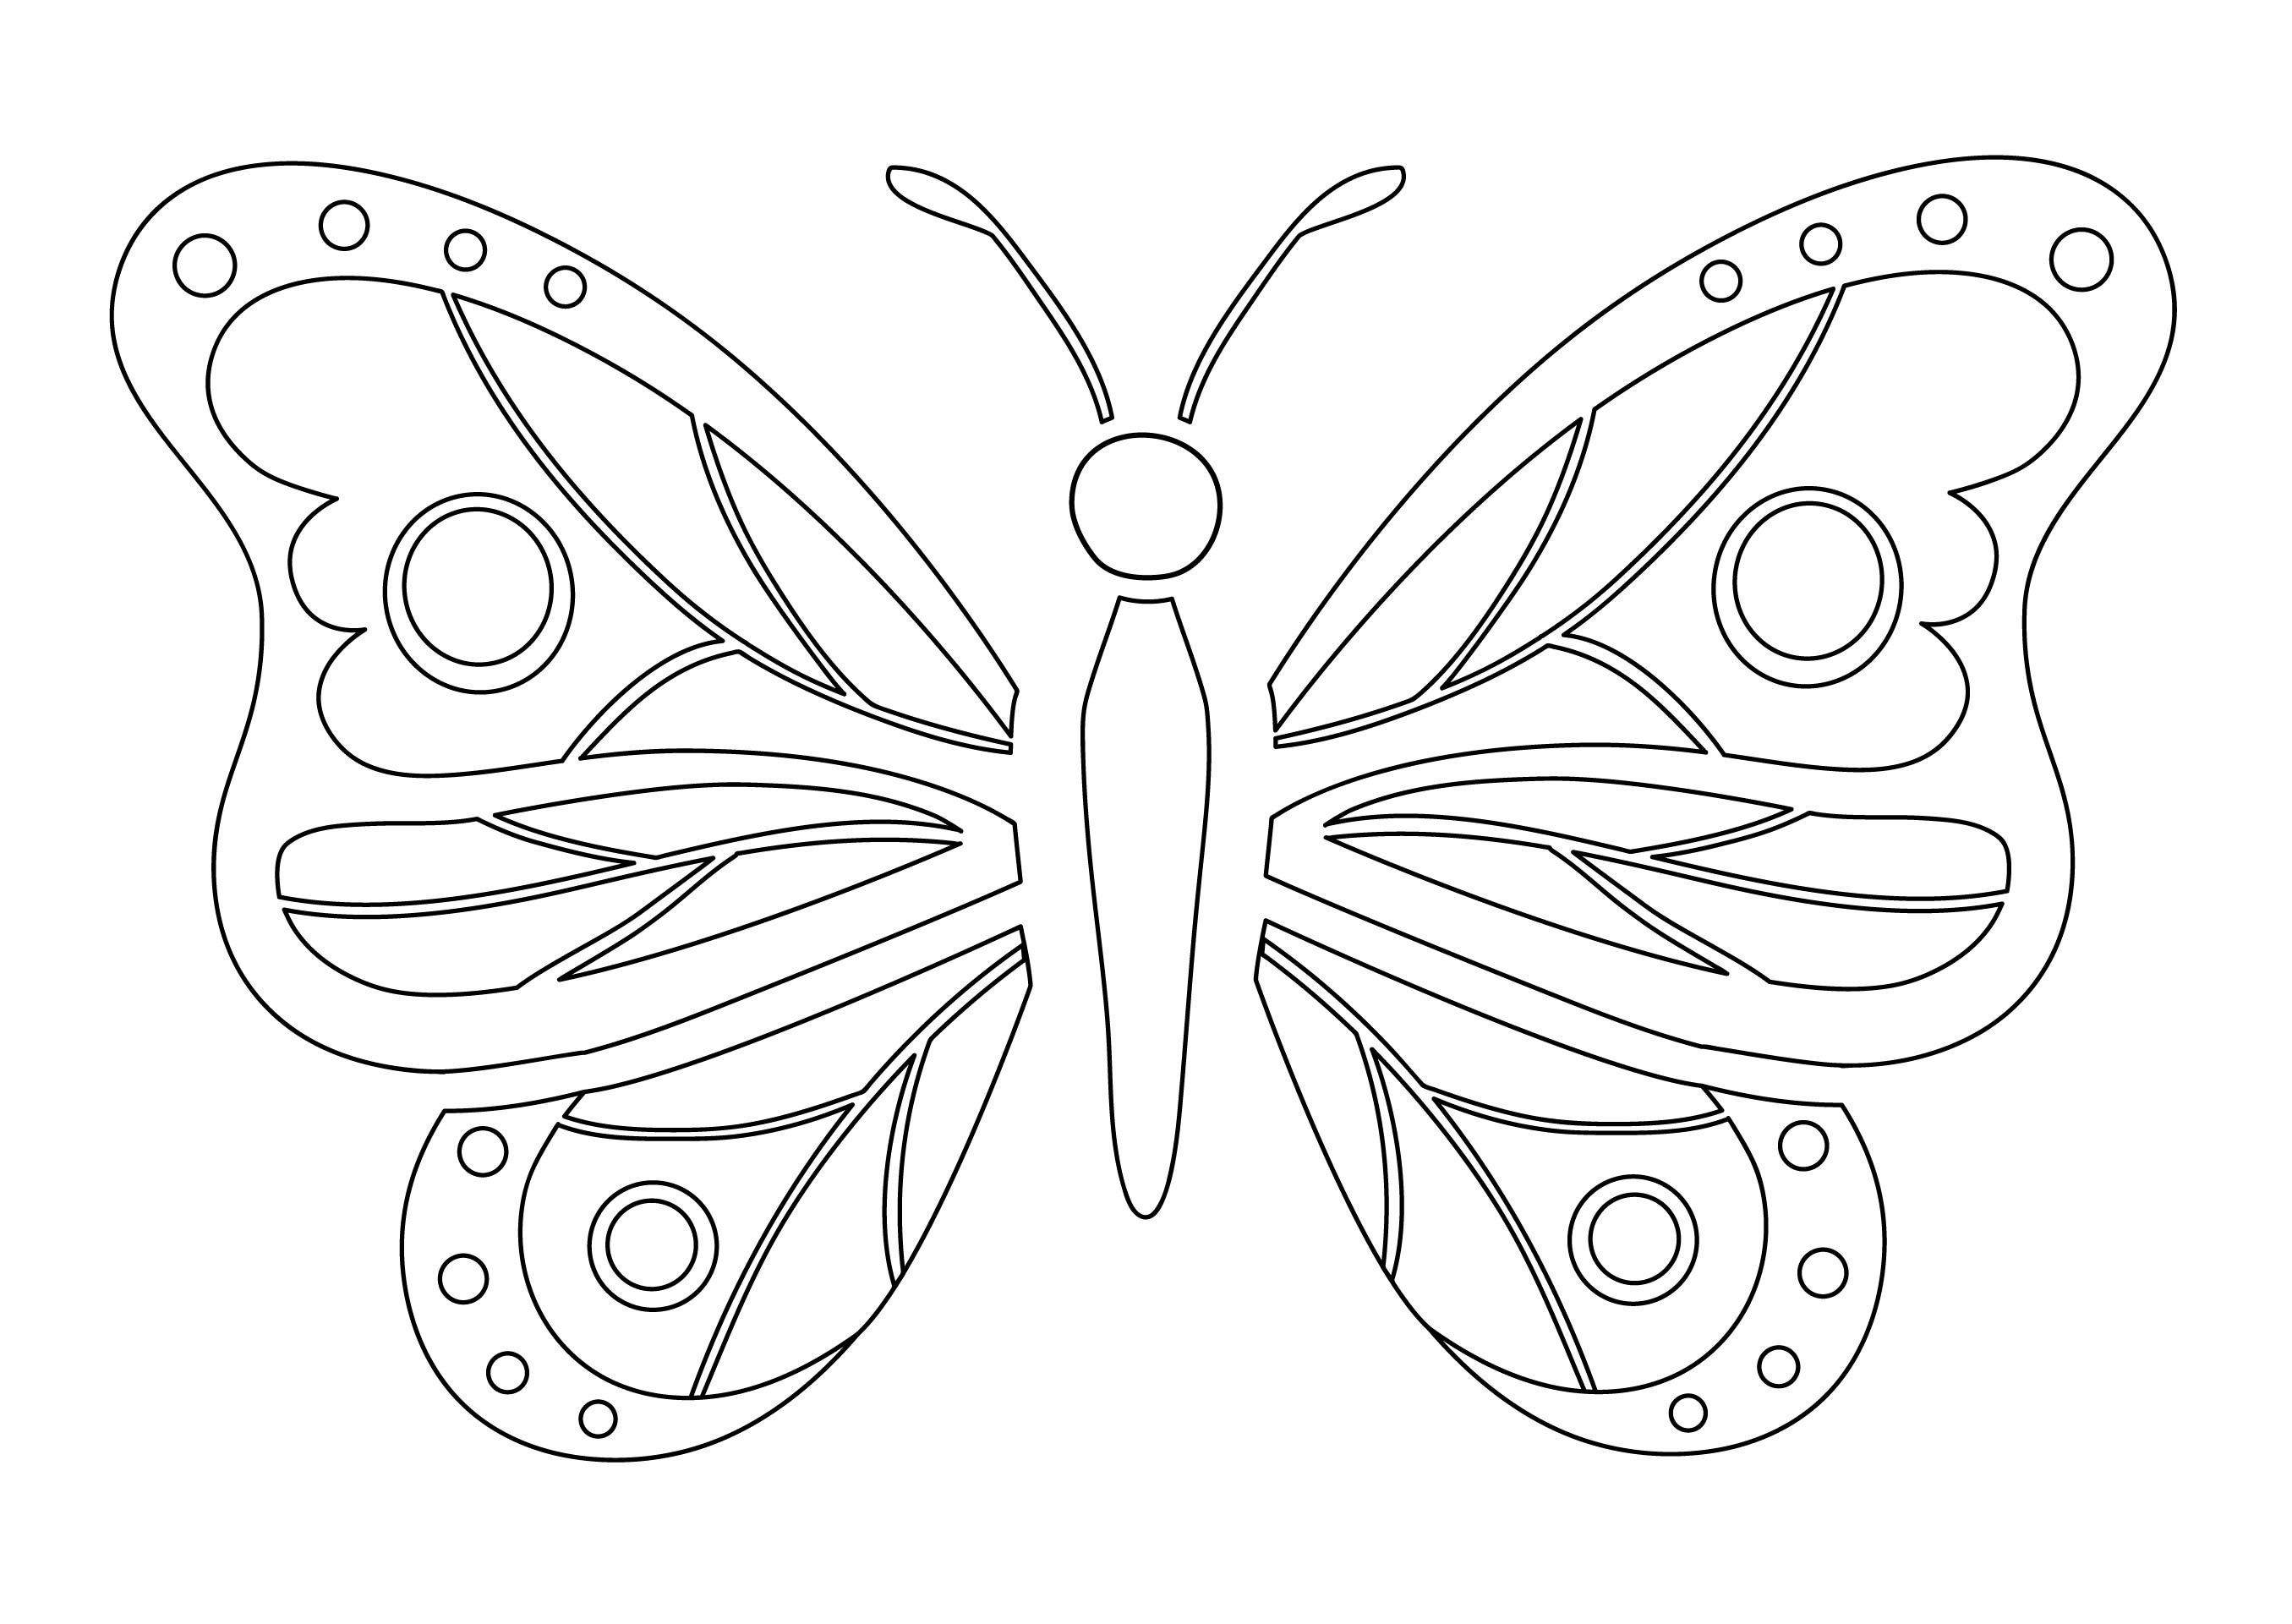 7 Best Images of Printable Butterfly Patterns - Stained Glass ...